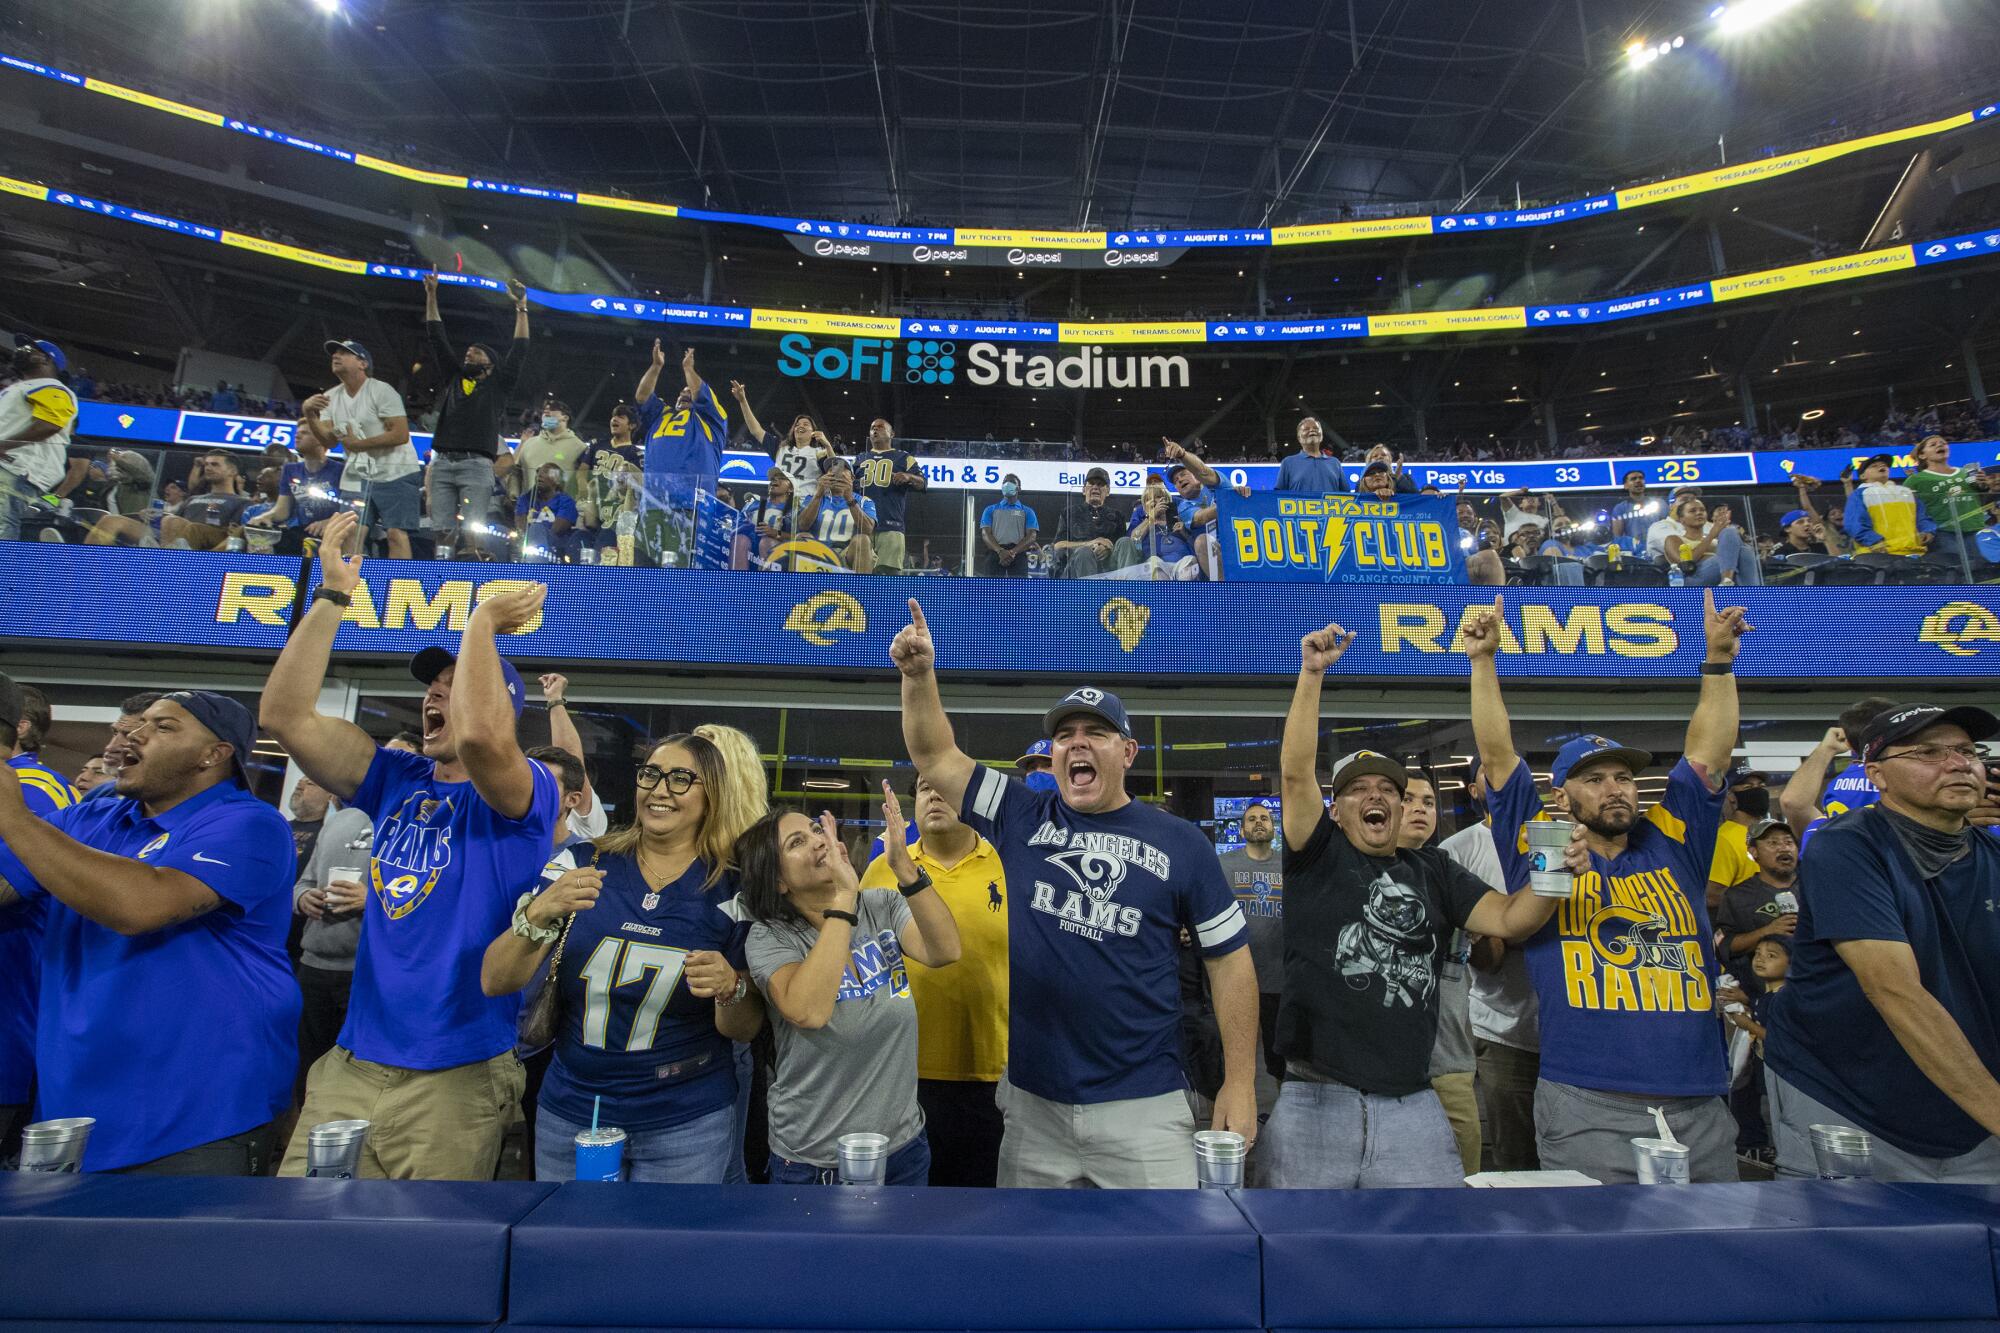 Chargers defeat Rams, 13-6, in first NFL game at SoFi stadium with fans